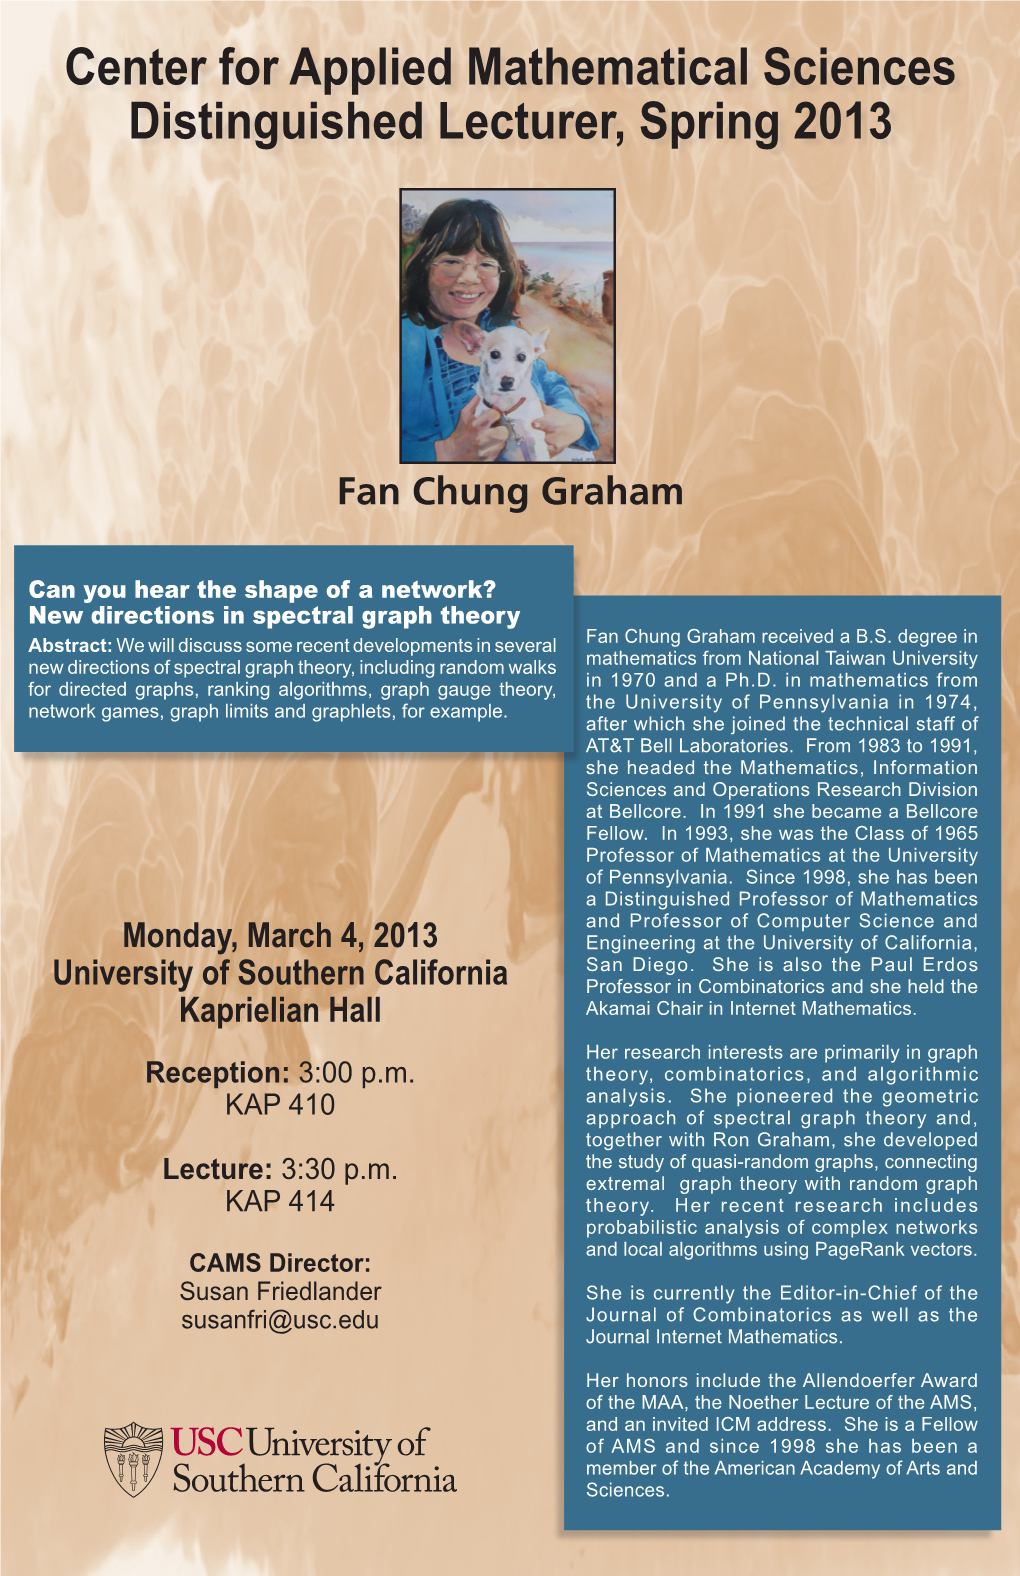 Center for Applied Mathematical Sciences Distinguished Lecturer, Spring 2013